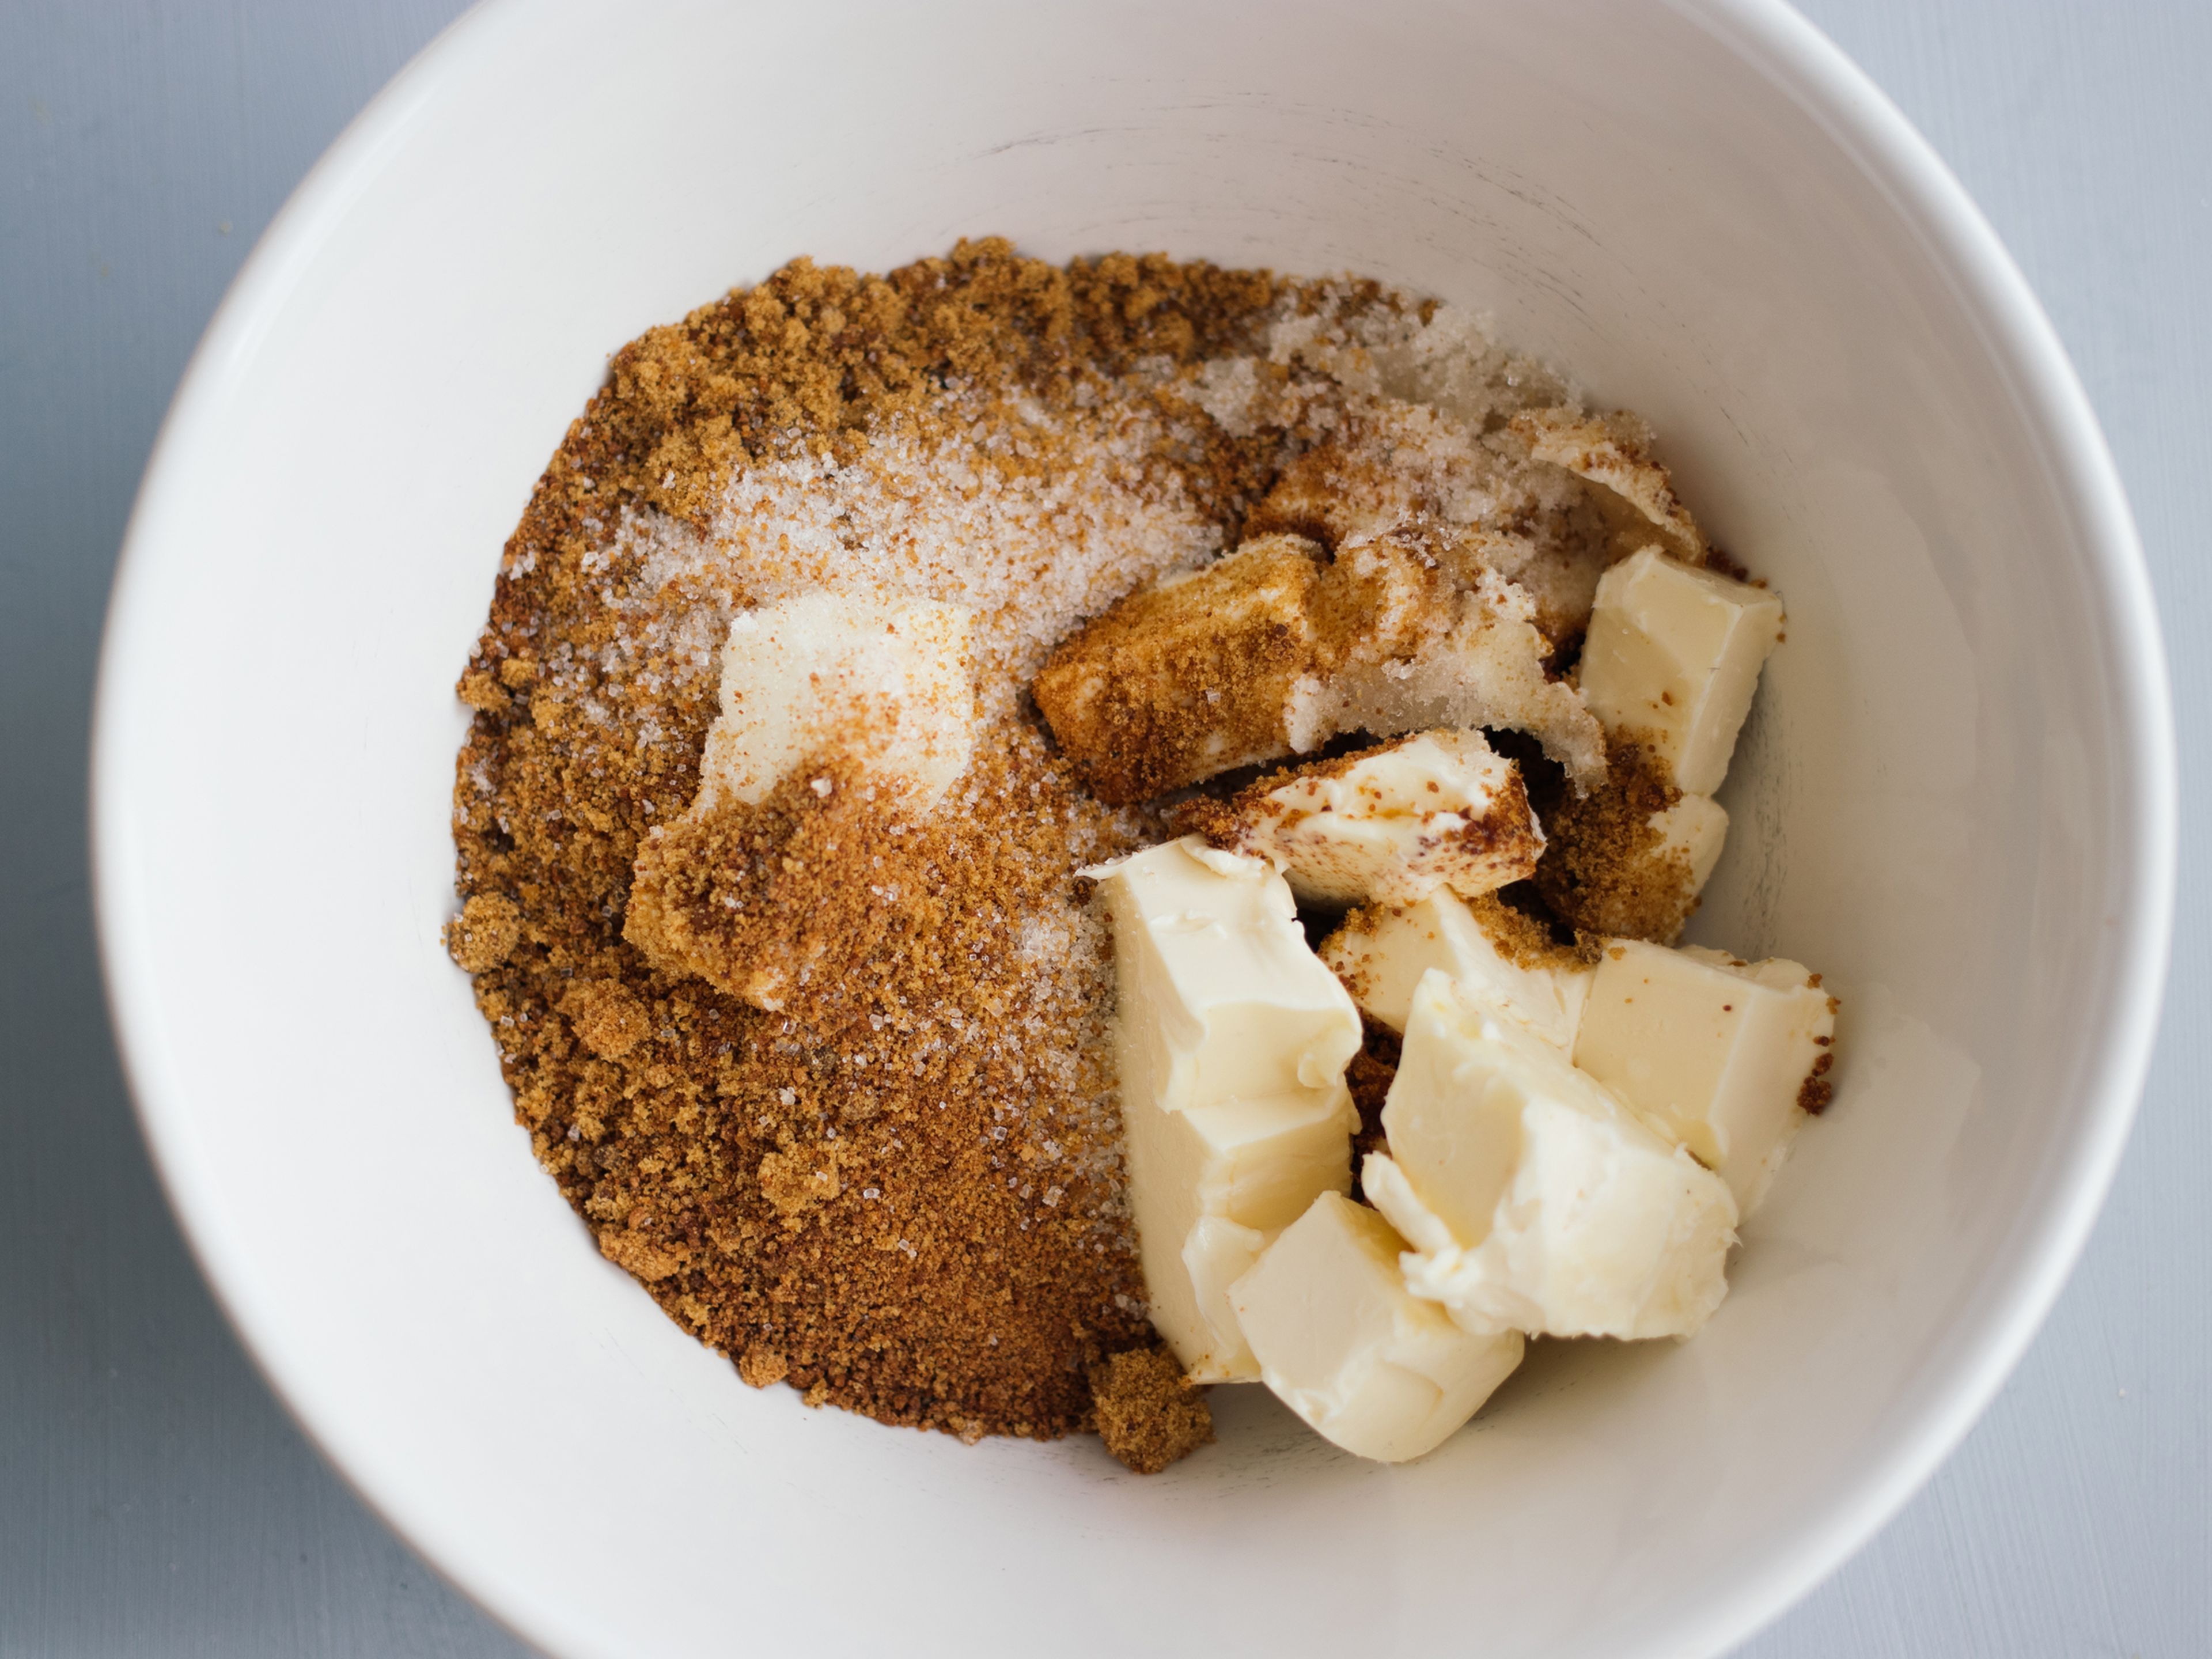 Add margarine, sugar, light brown sugar, and coconut sugar to a large bowl and beat until the mixture is light and creamy. Add tahini, applesauce and vanilla extract, and stir to combine.